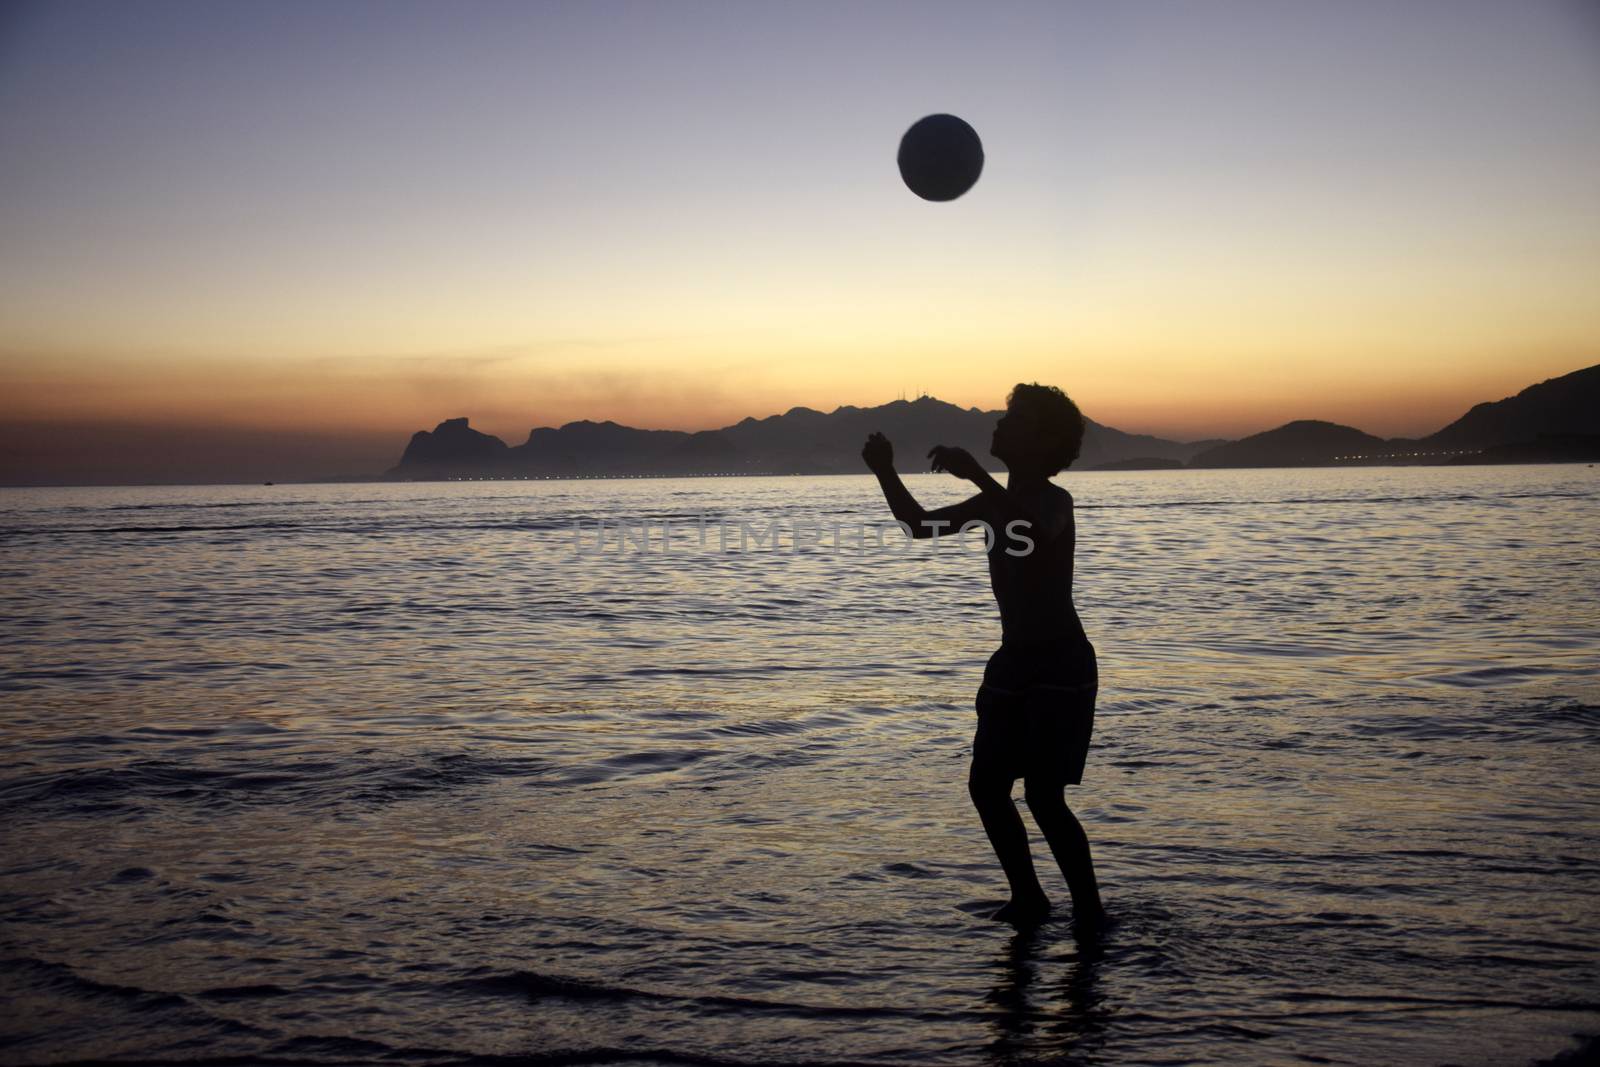 Playing soccer on the beach sunset by eldervs